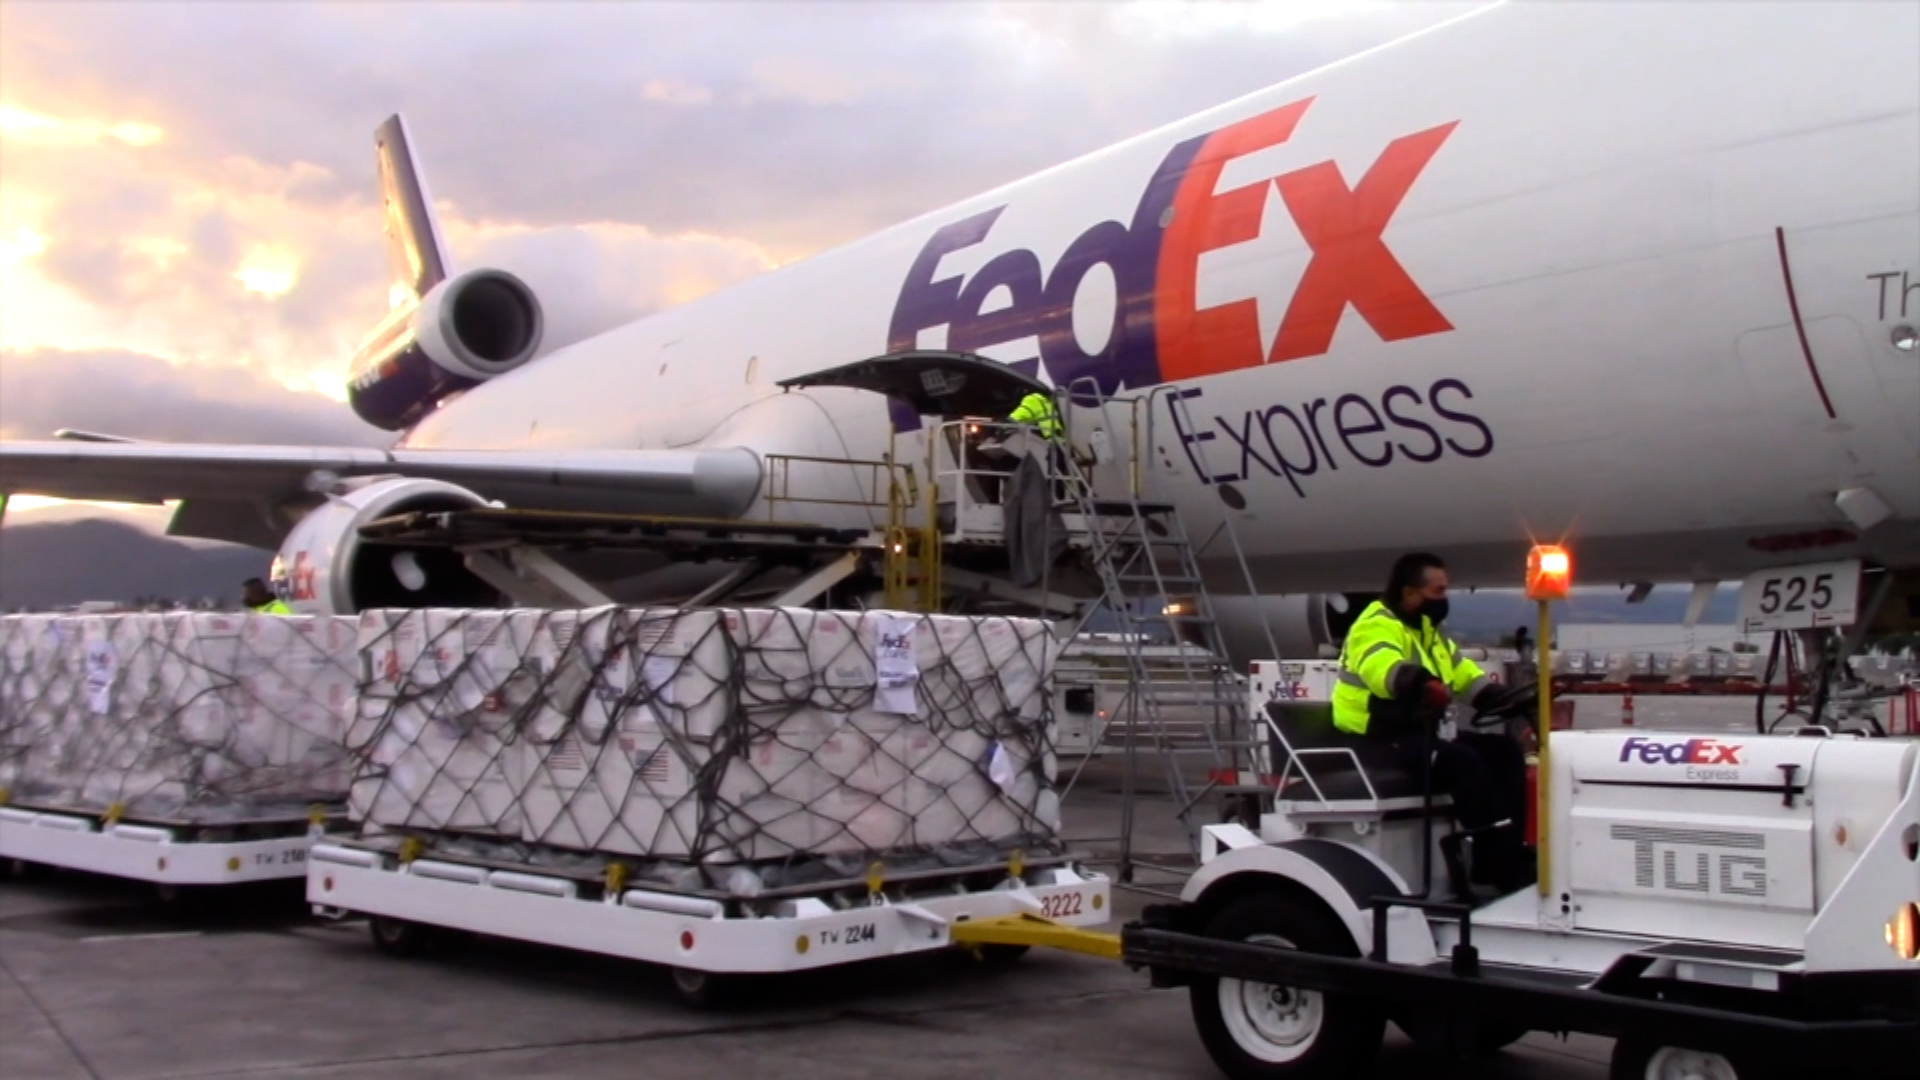 A shipment of Johnson & Johnson vaccines are delivered at Toluca International Airport in Toluca, Mexico, on June 15.